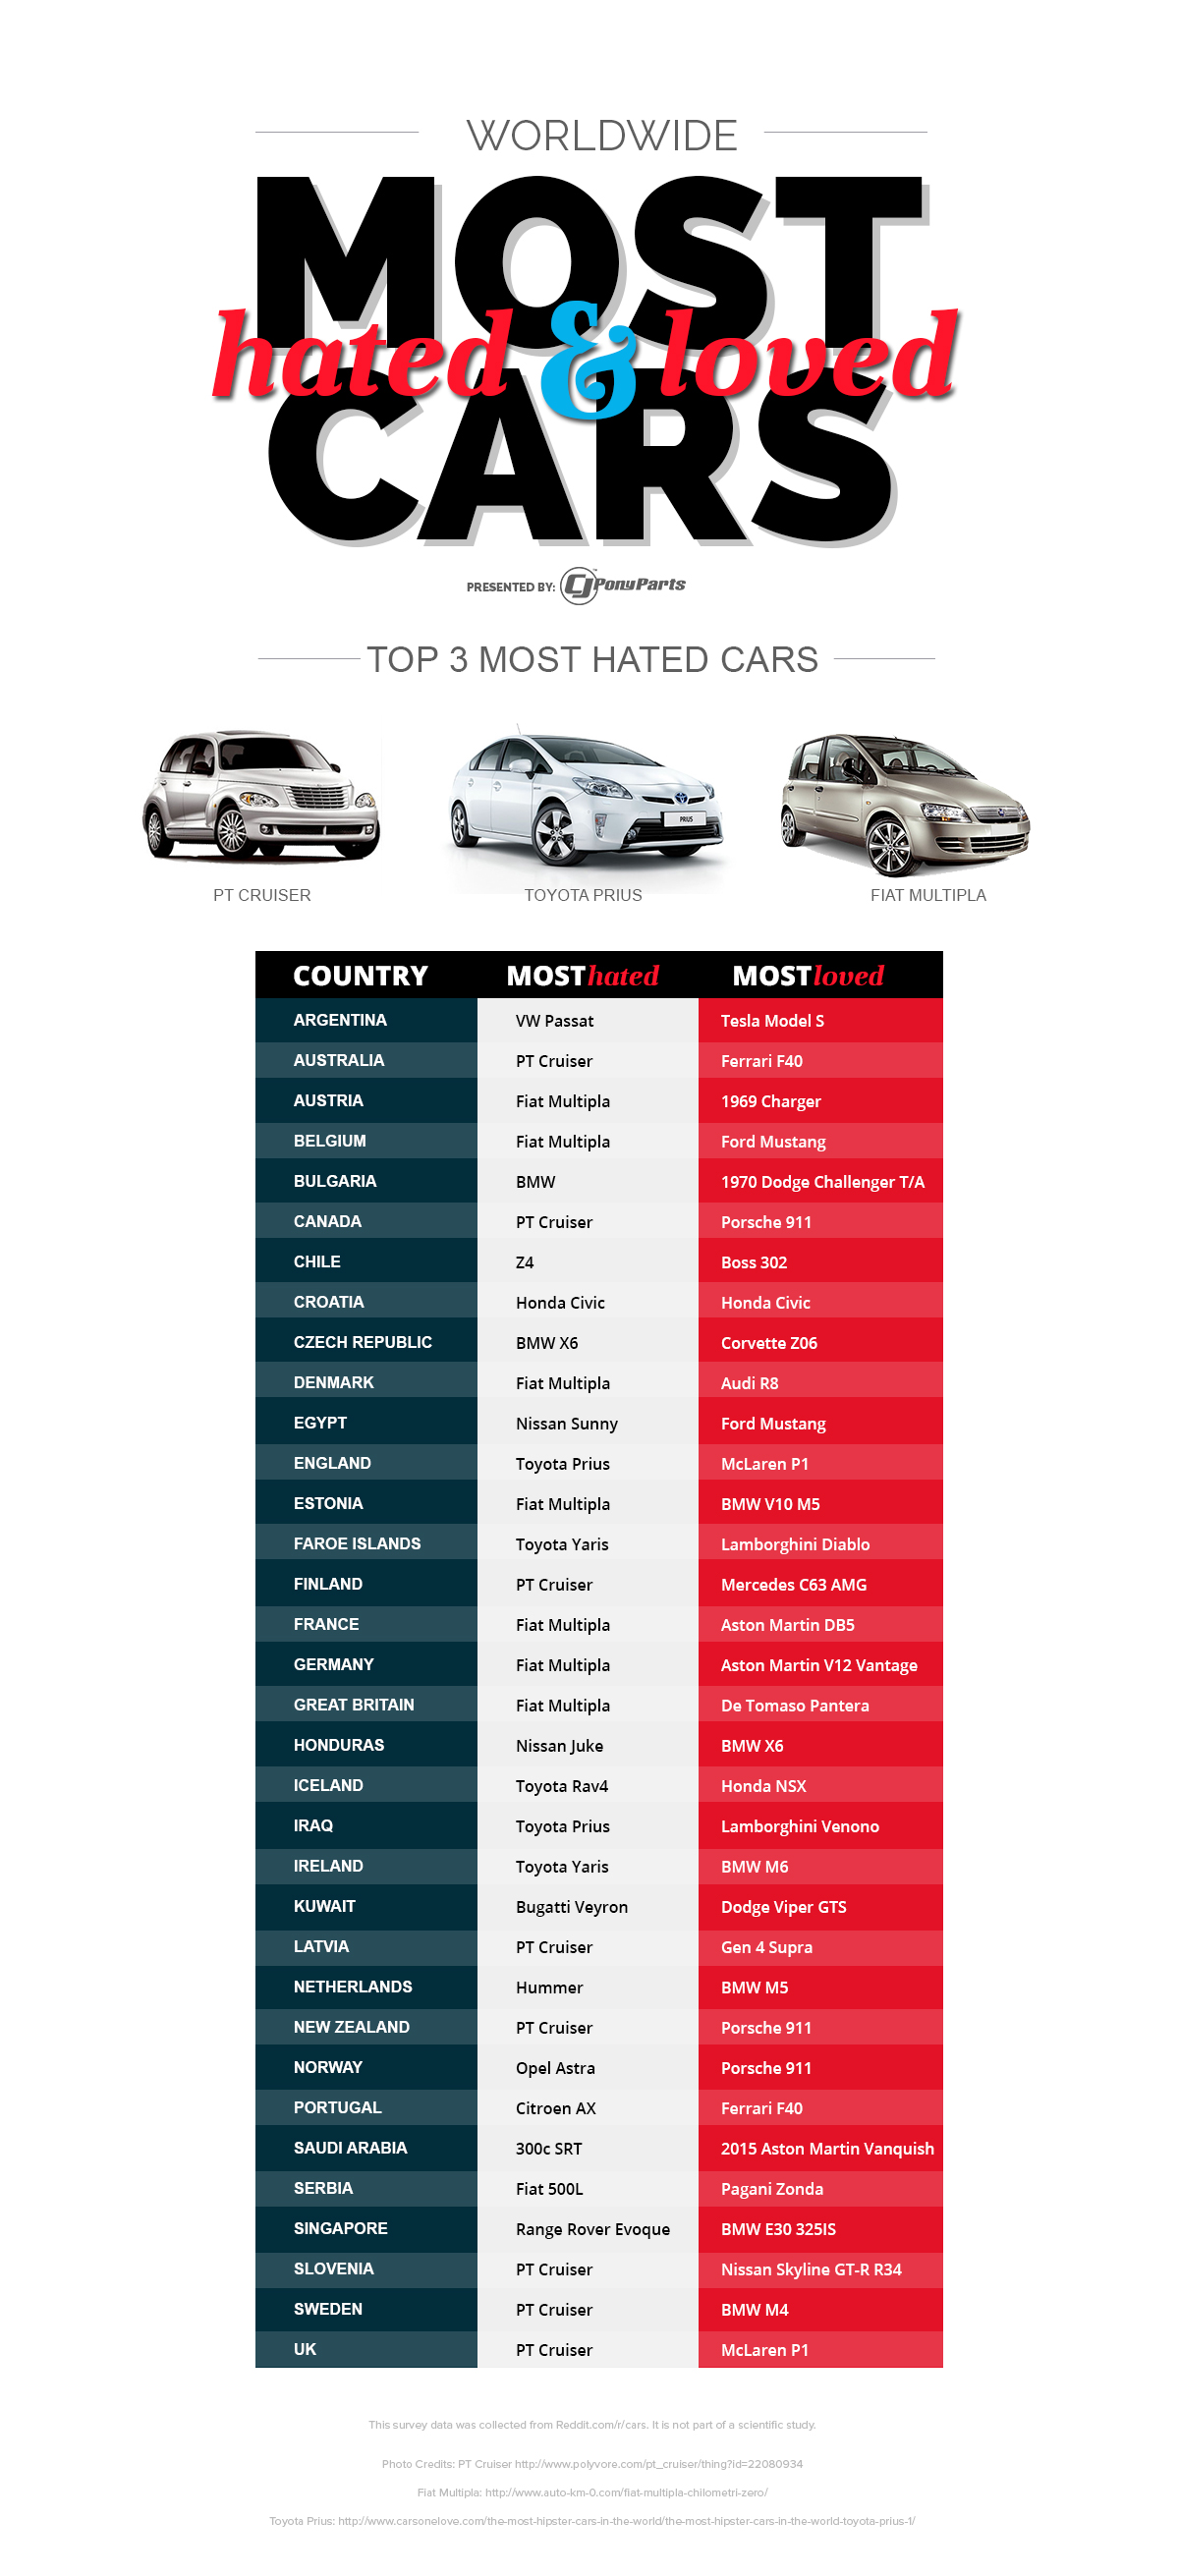 Worldwide-Most-Hated-and-Loved-Cars